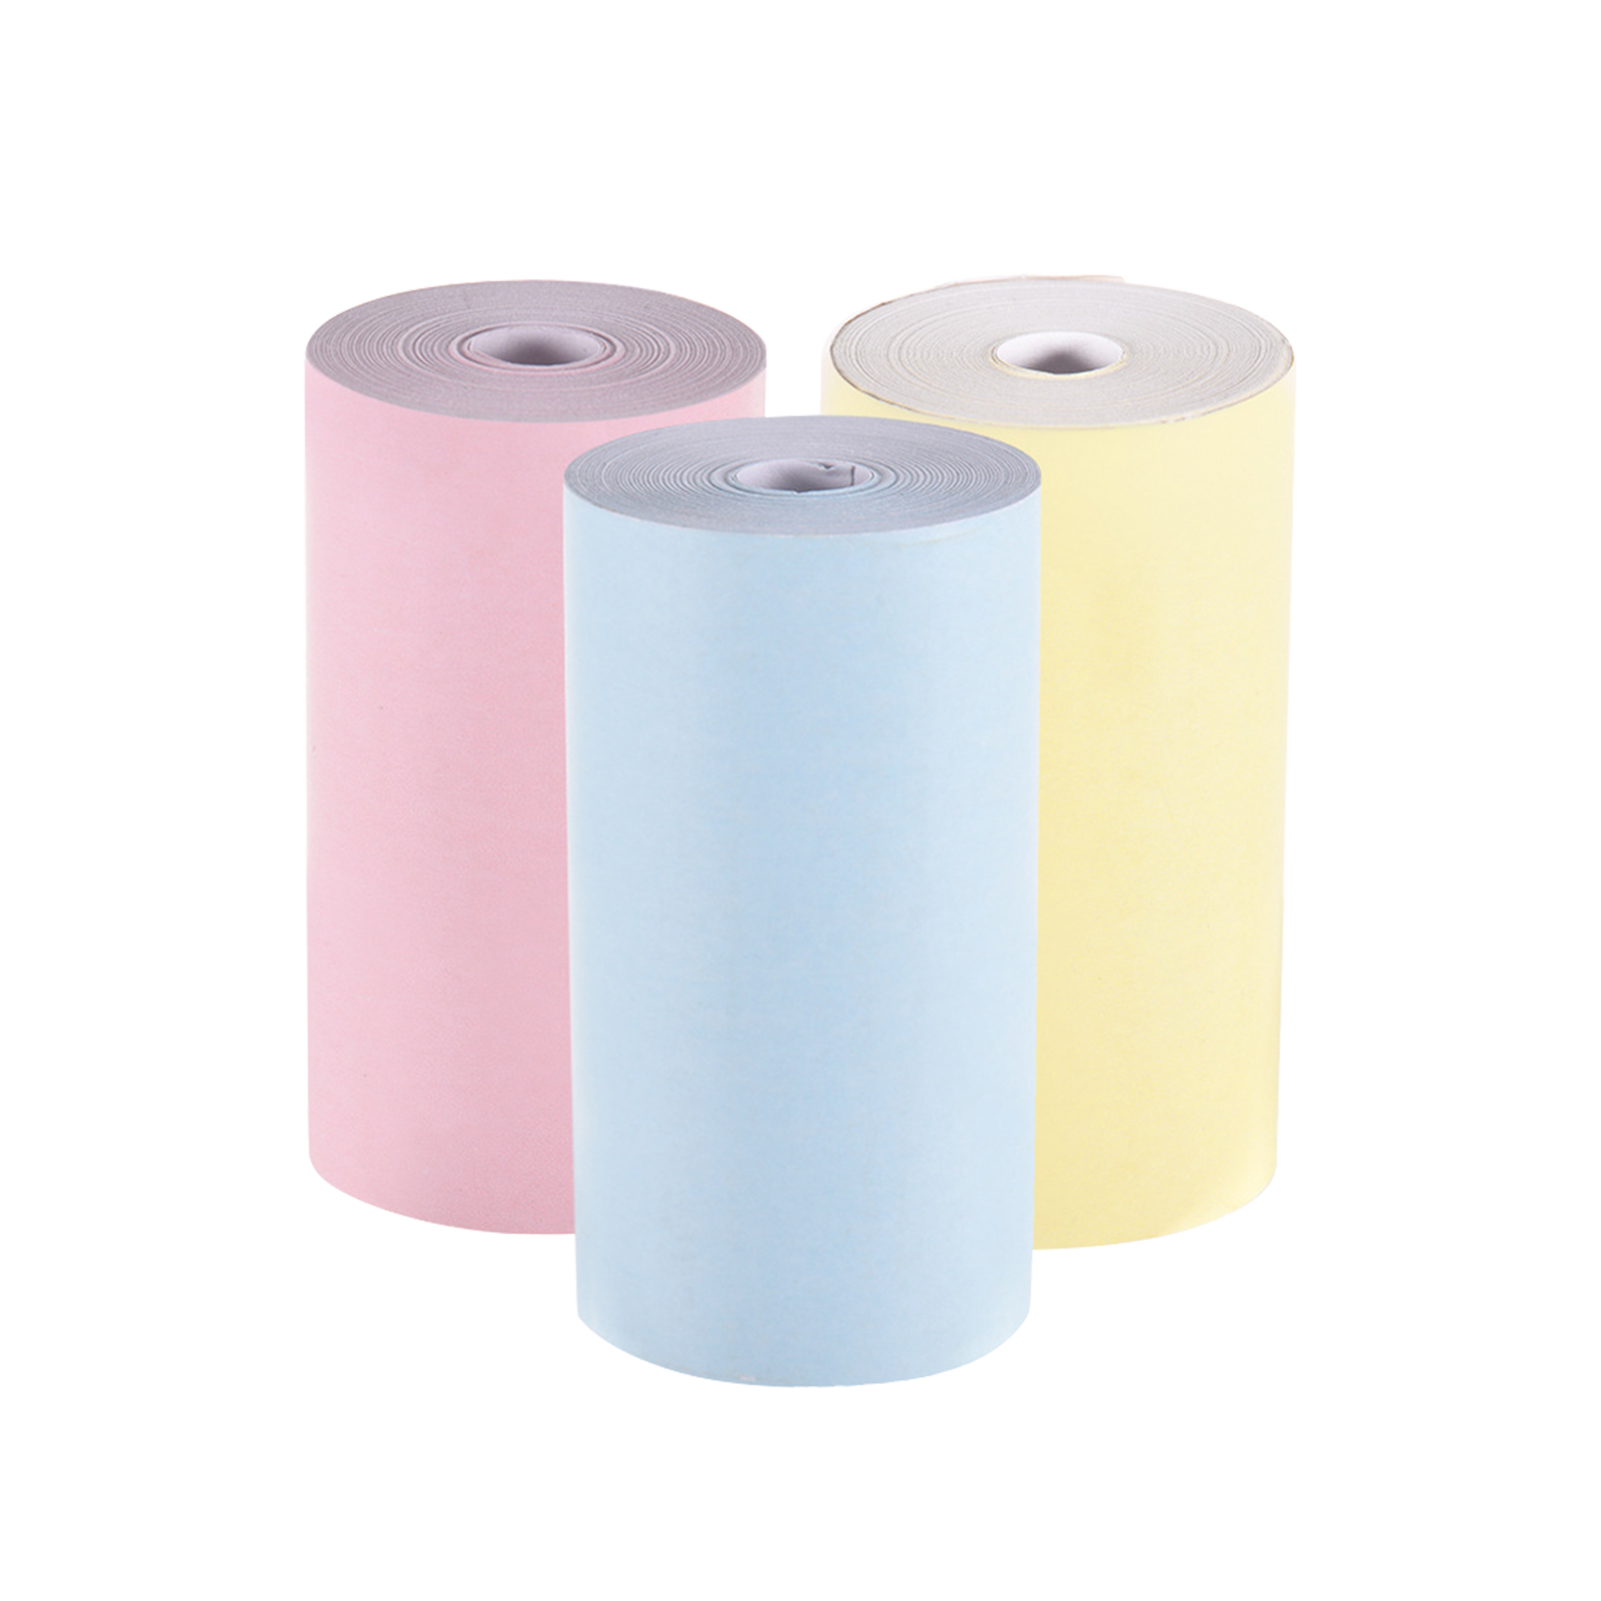 3colors/set Smooth Small Solid 57x30mm Restaurant Mini Thermal Paper Multifunction Portable Photo Printer Supermarket Printing